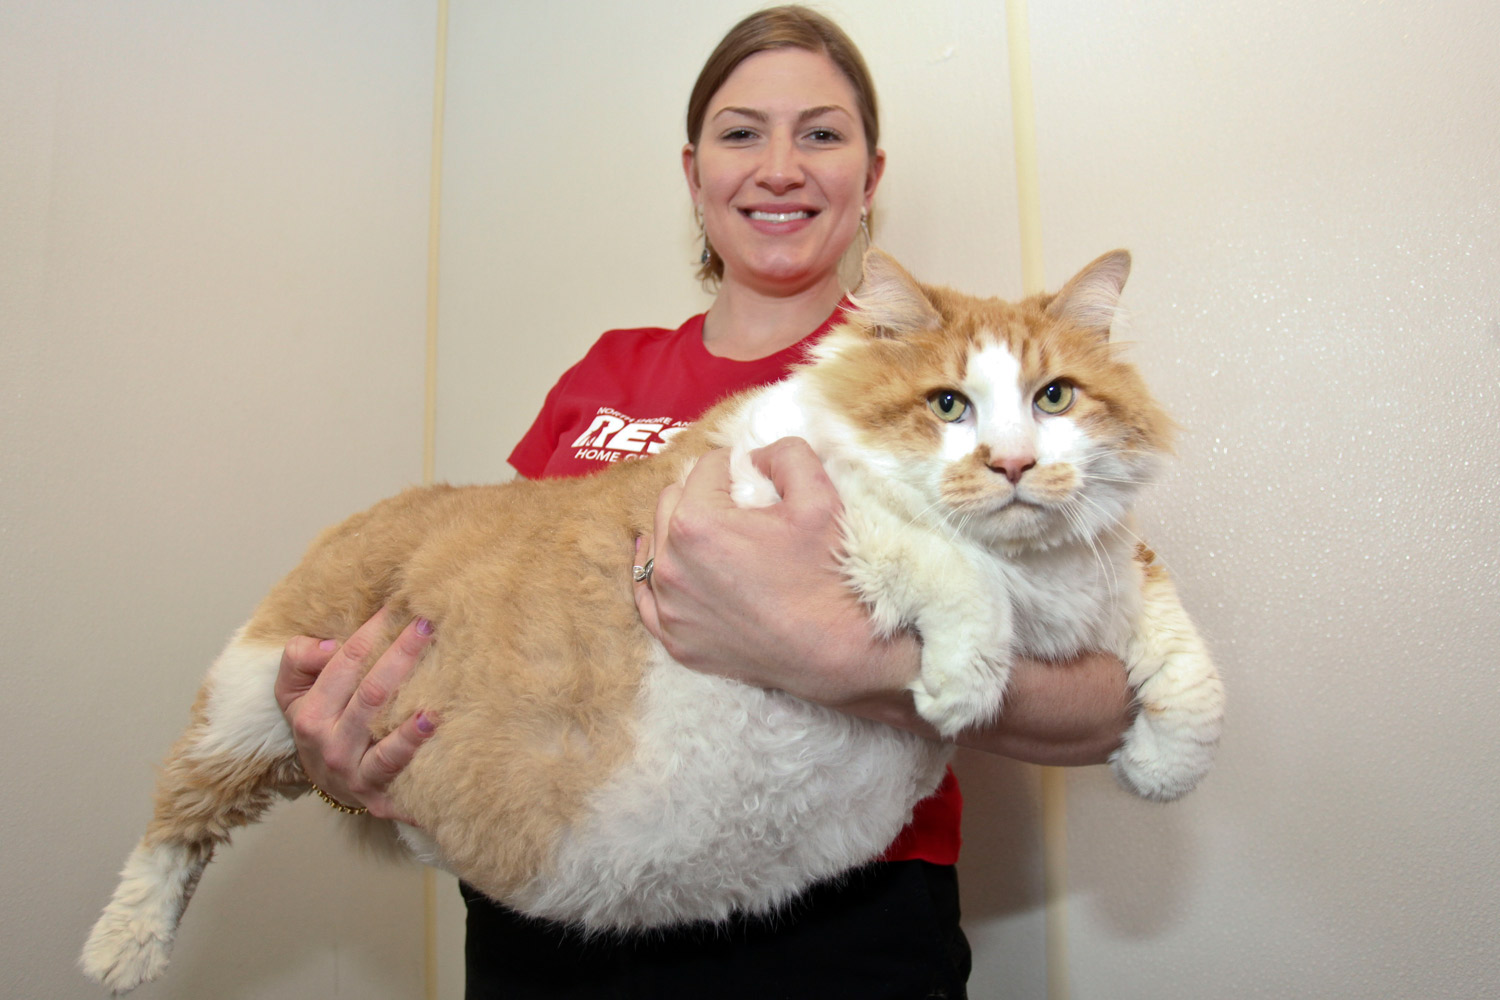 Janet Ciminelli of North Shore Animal League of America holds Garfield at Long Island on June 4, 2012 in New York City. (Laurentiu Garofeanu / Barcroft USA / Barcoft Media / Getty Images)